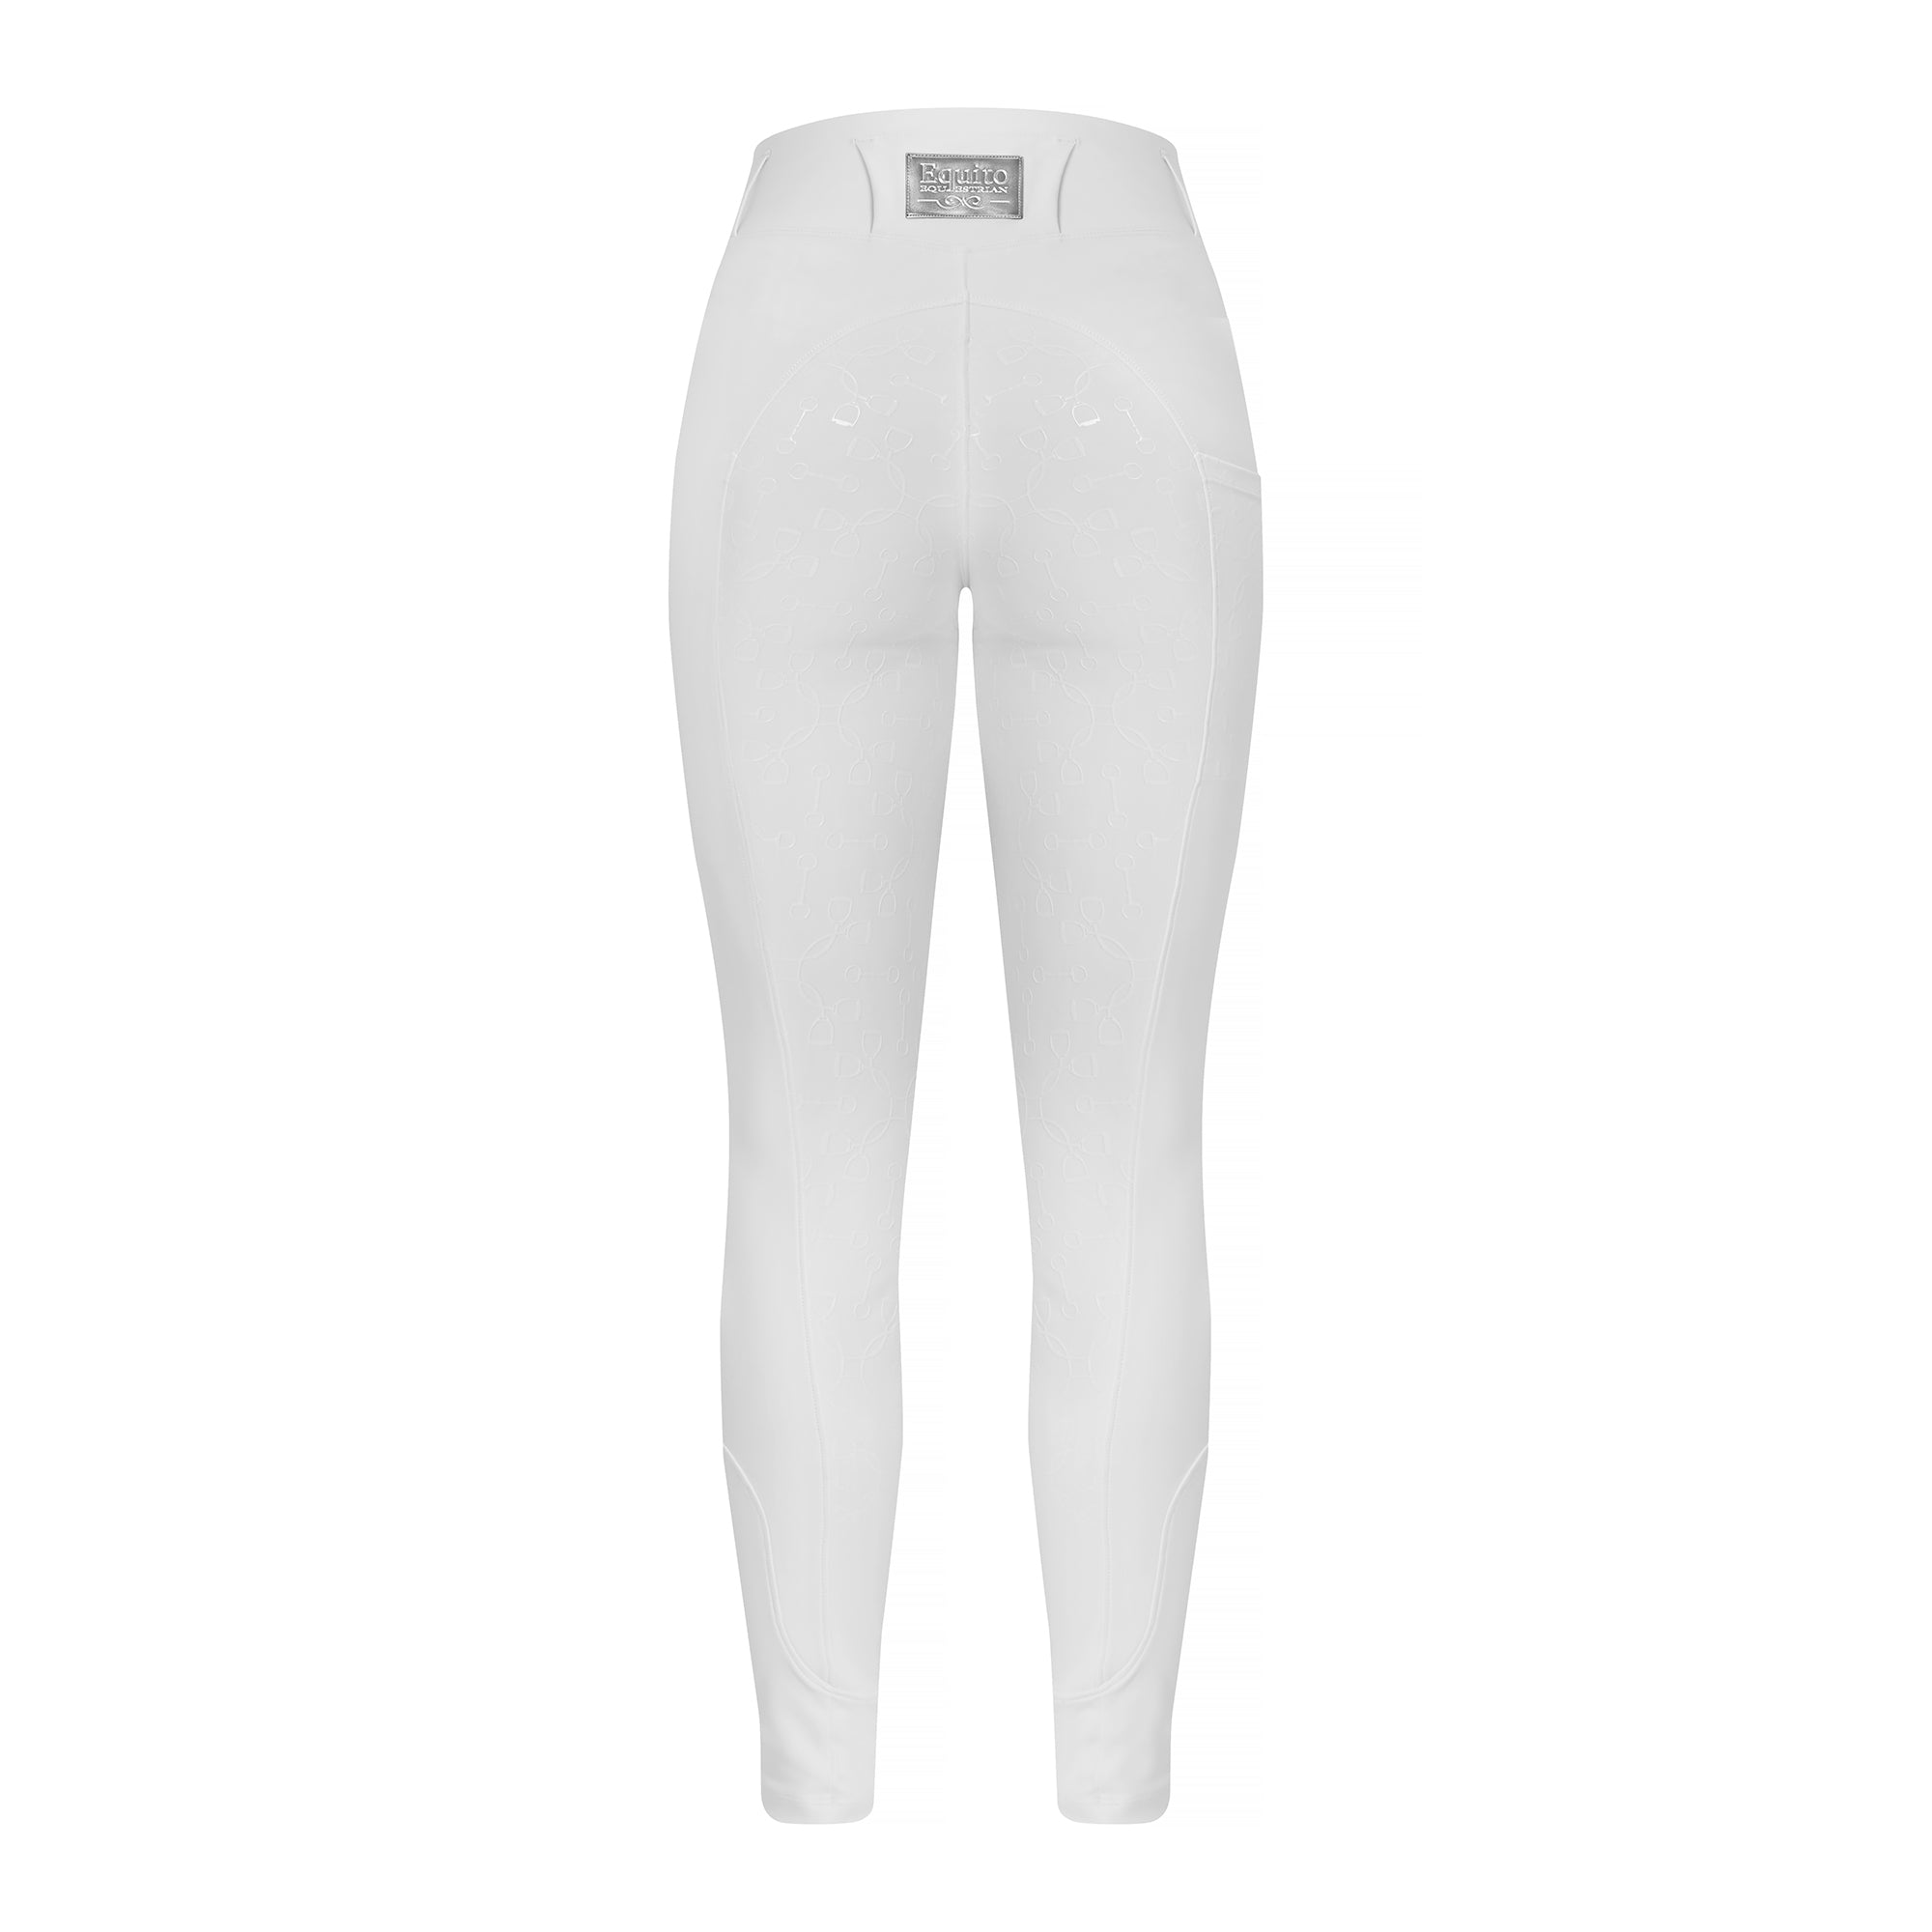 Equito white and silver riding leggings